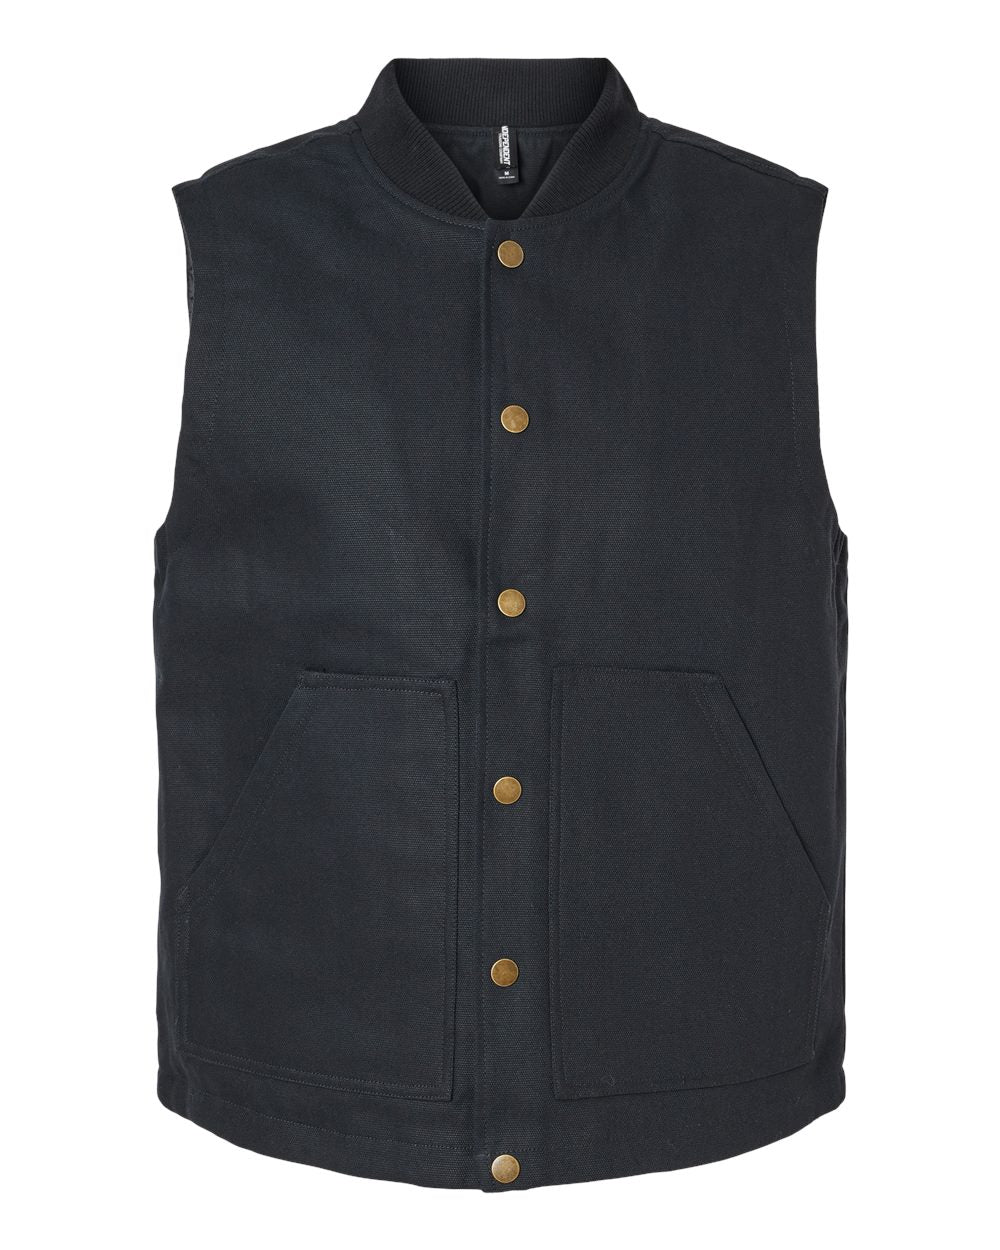 Independent Trading Co. - Insulated Canvas Workwear Vest